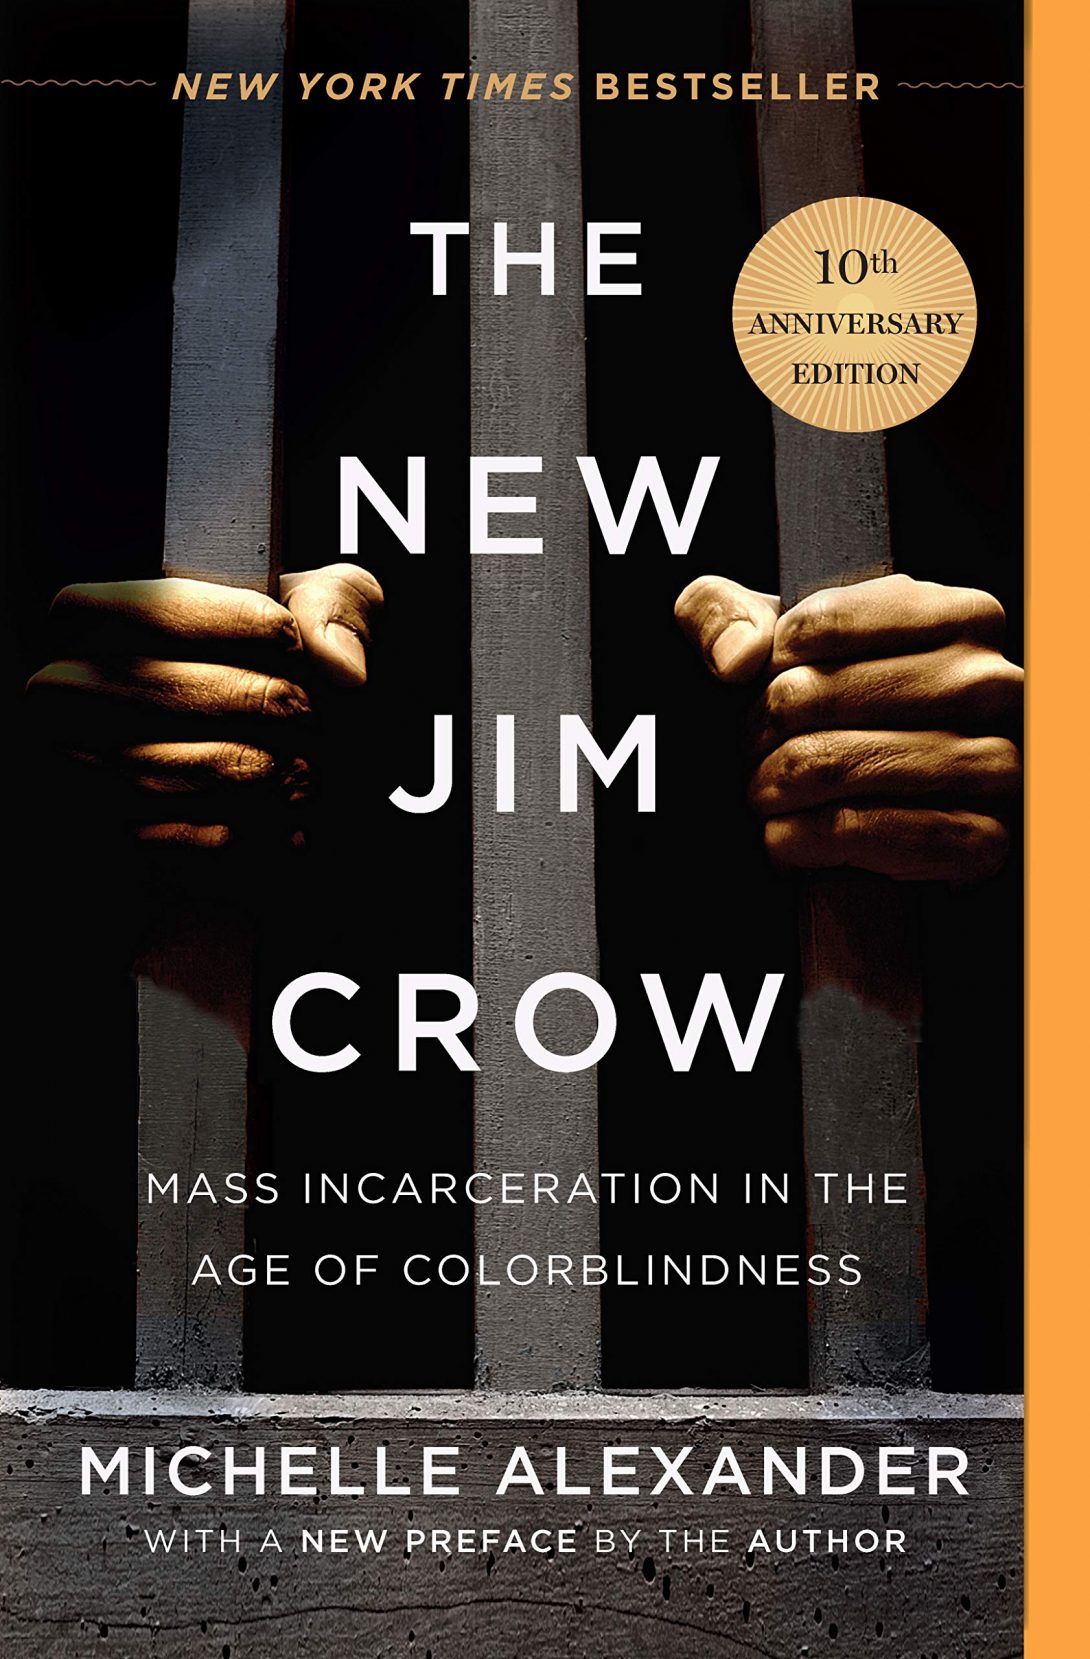 The New Jim Crow book cover, with text of title and author name set against a black background with two hands holding onto gray bars